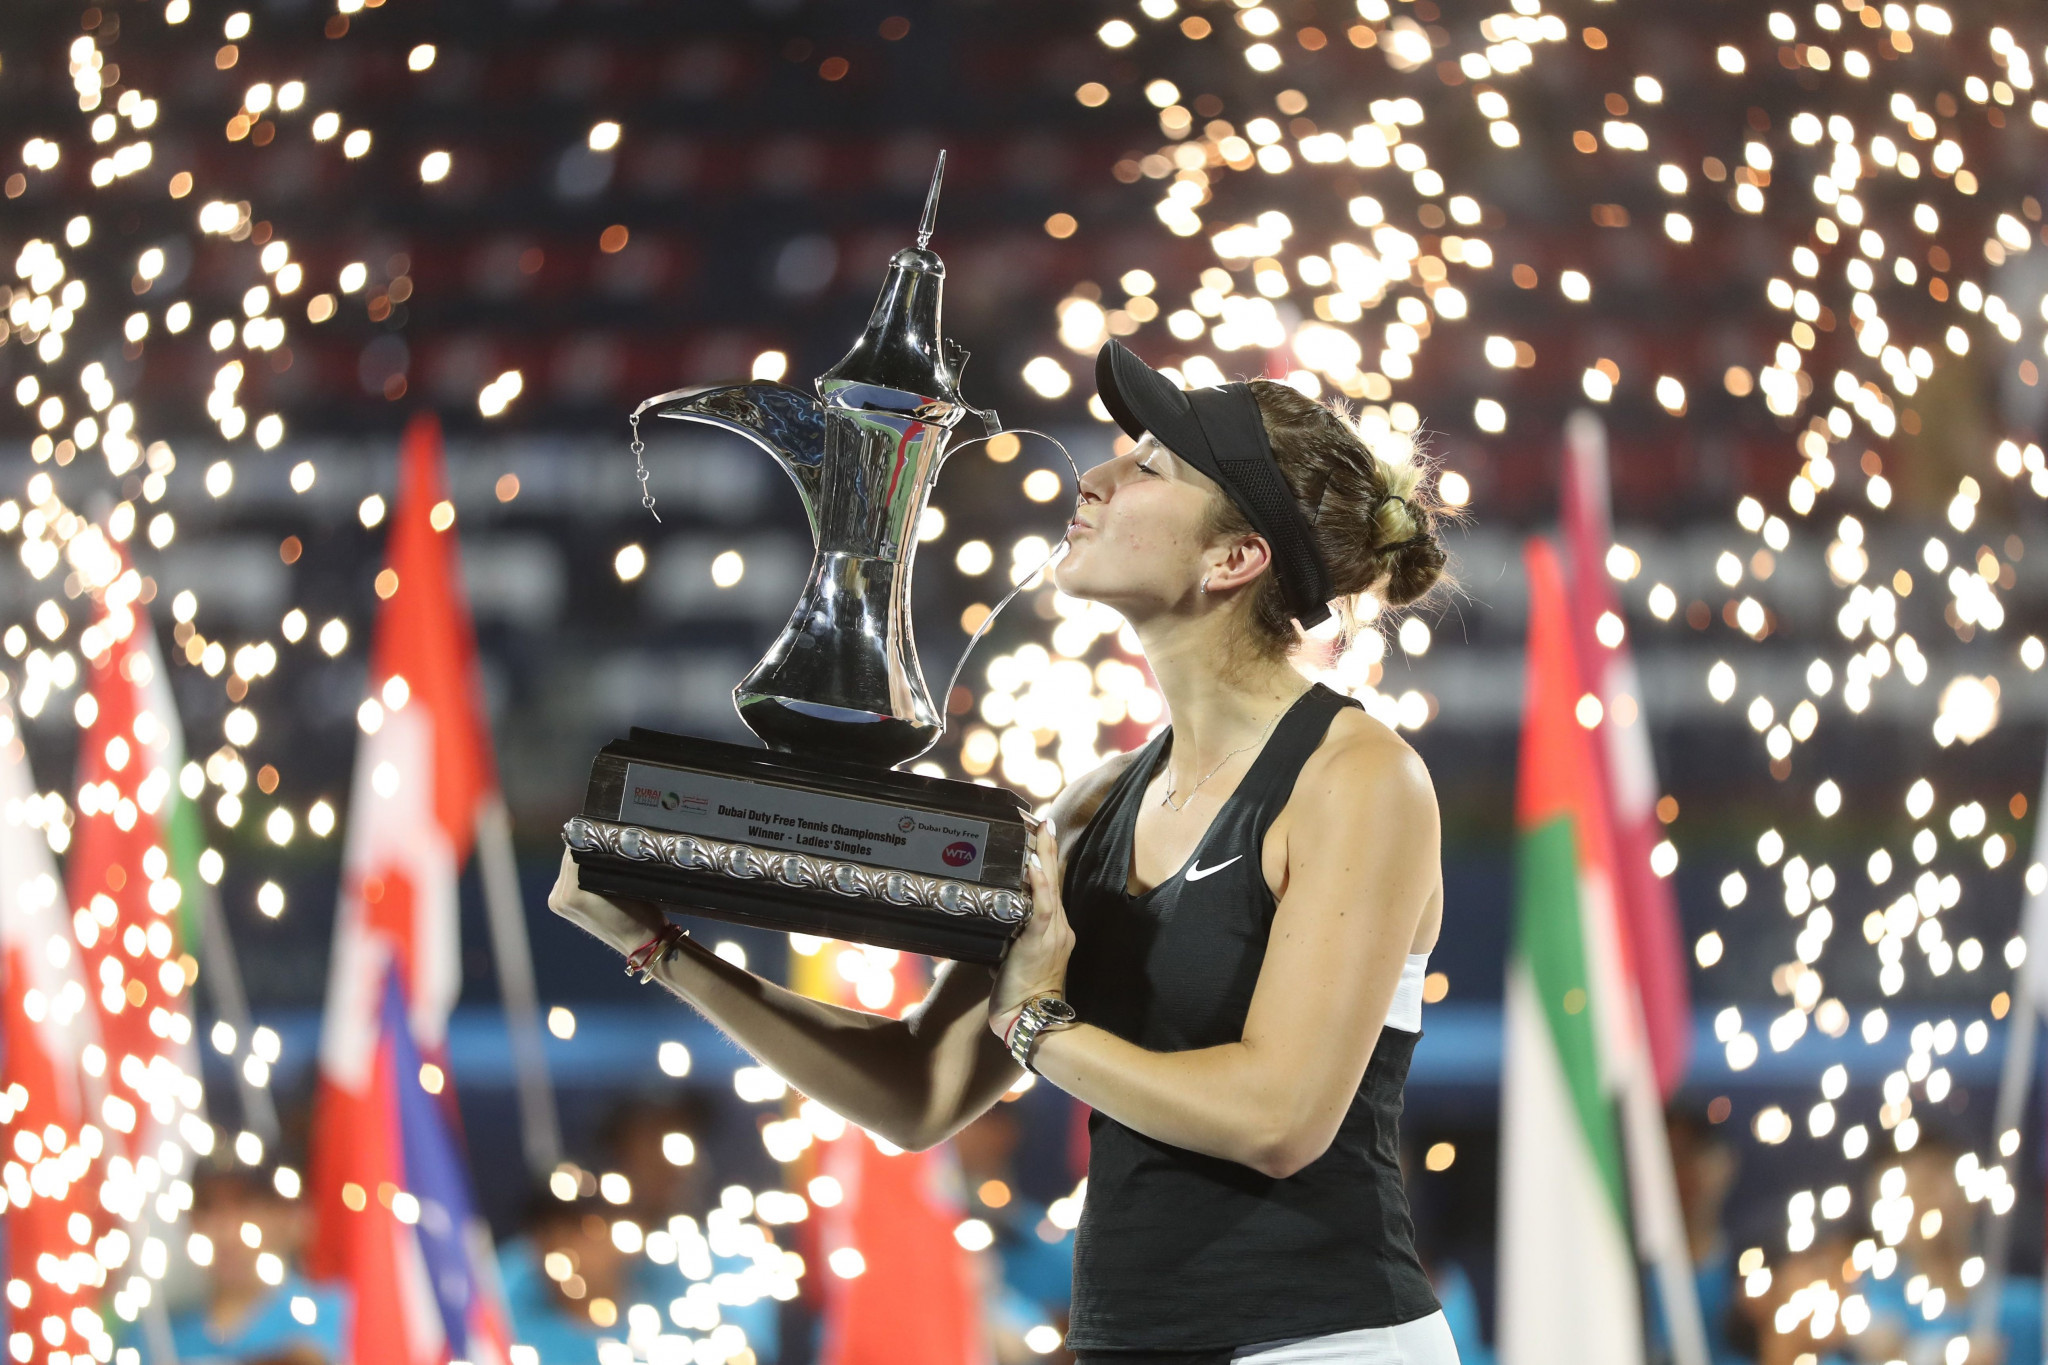 Belinda Bencic ousted Petra Kvitová in three sets to clinch victory in Dubai ©Getty Images